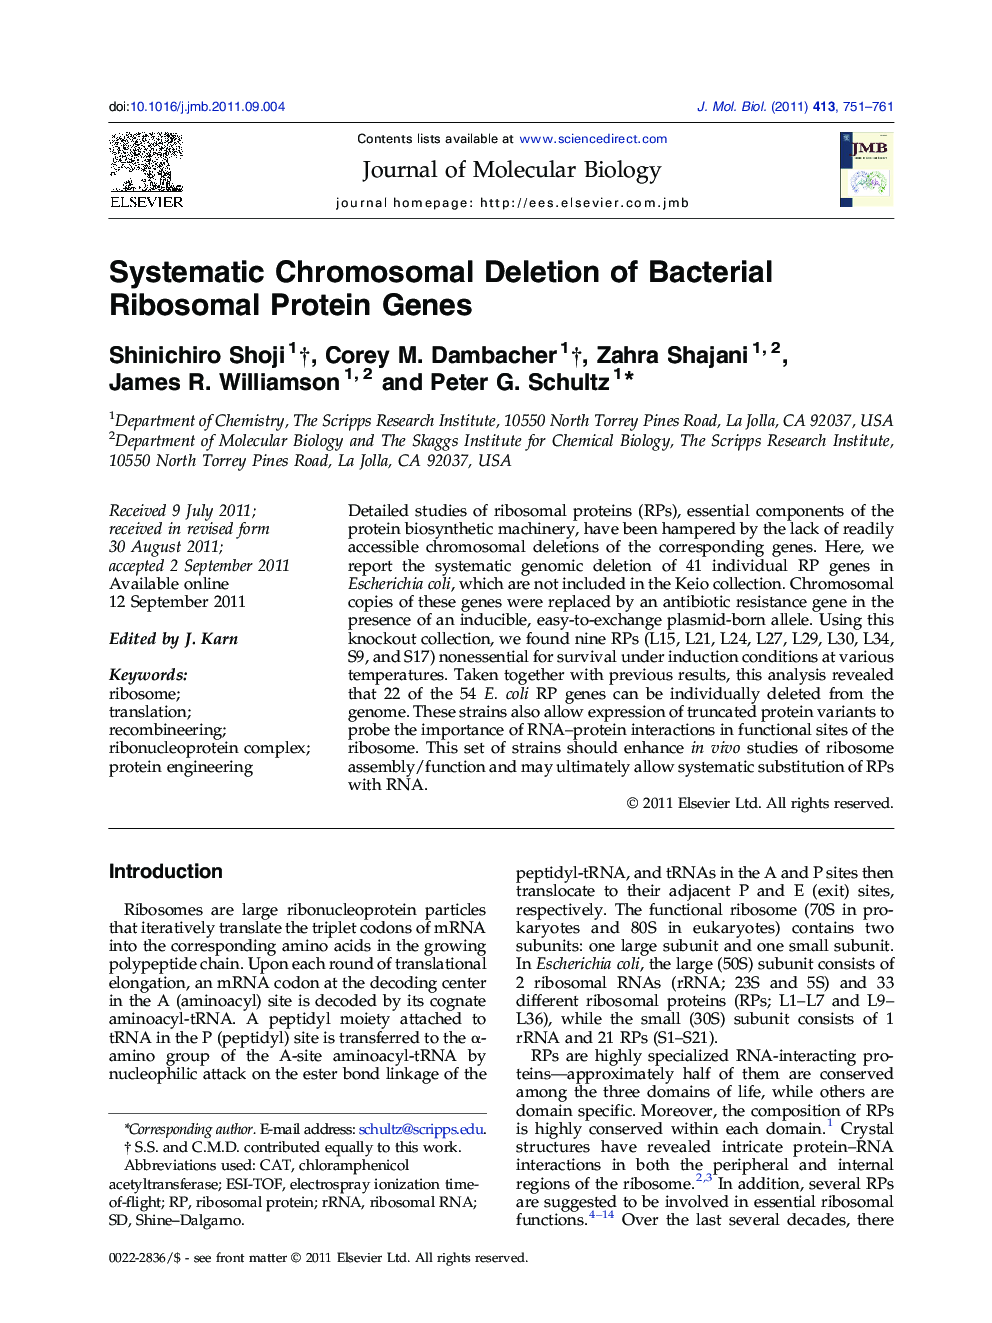 Systematic Chromosomal Deletion of Bacterial Ribosomal Protein Genes